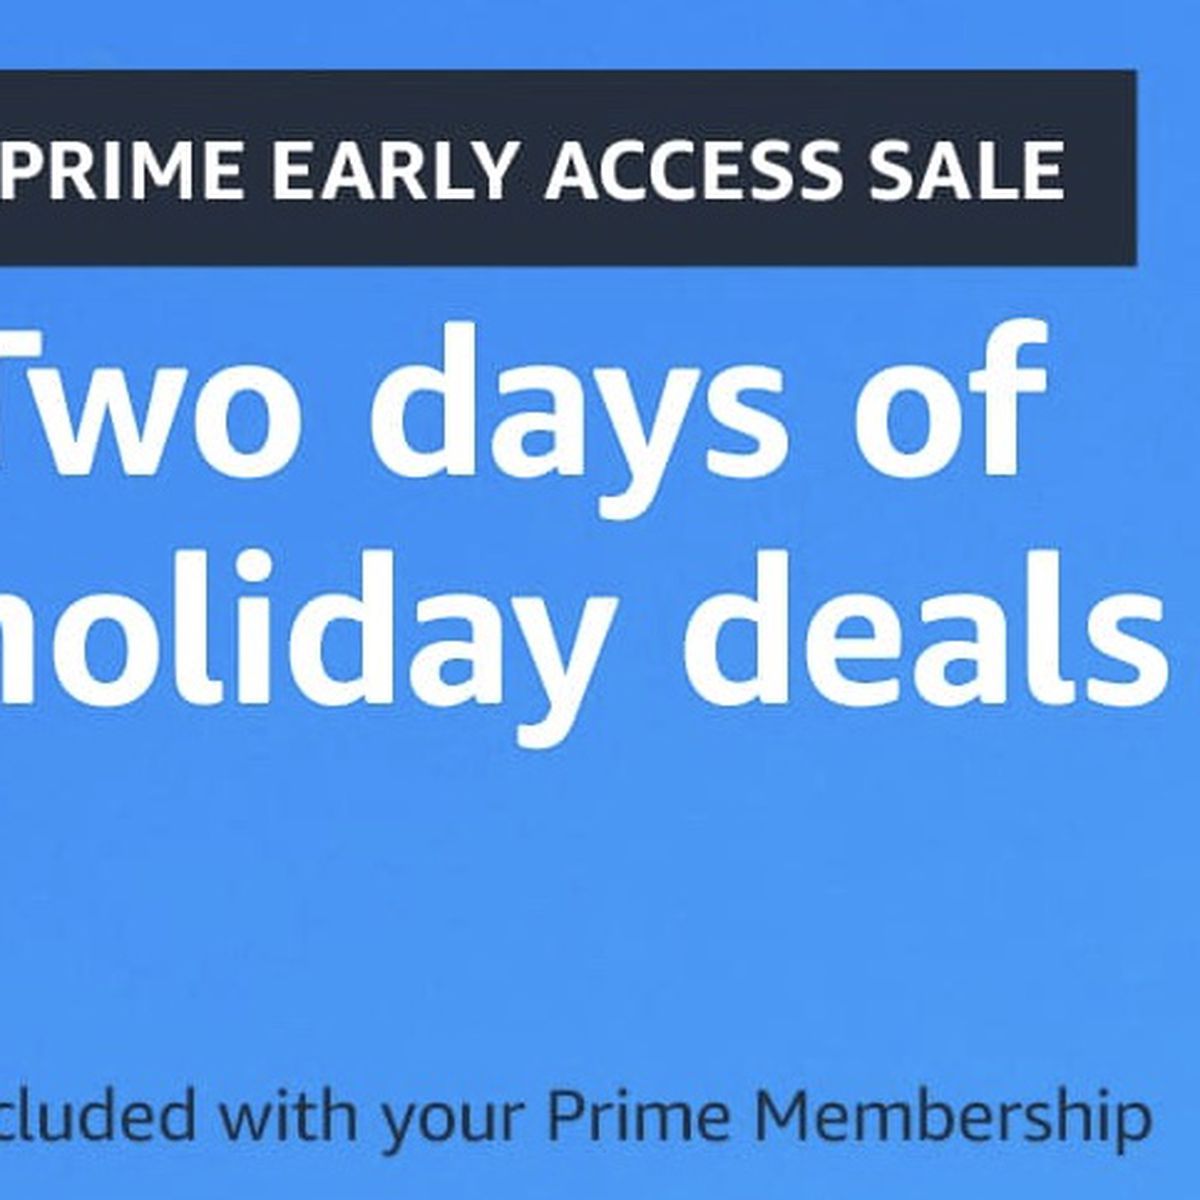 Prime Day will offer over 40 personalized deal features this year